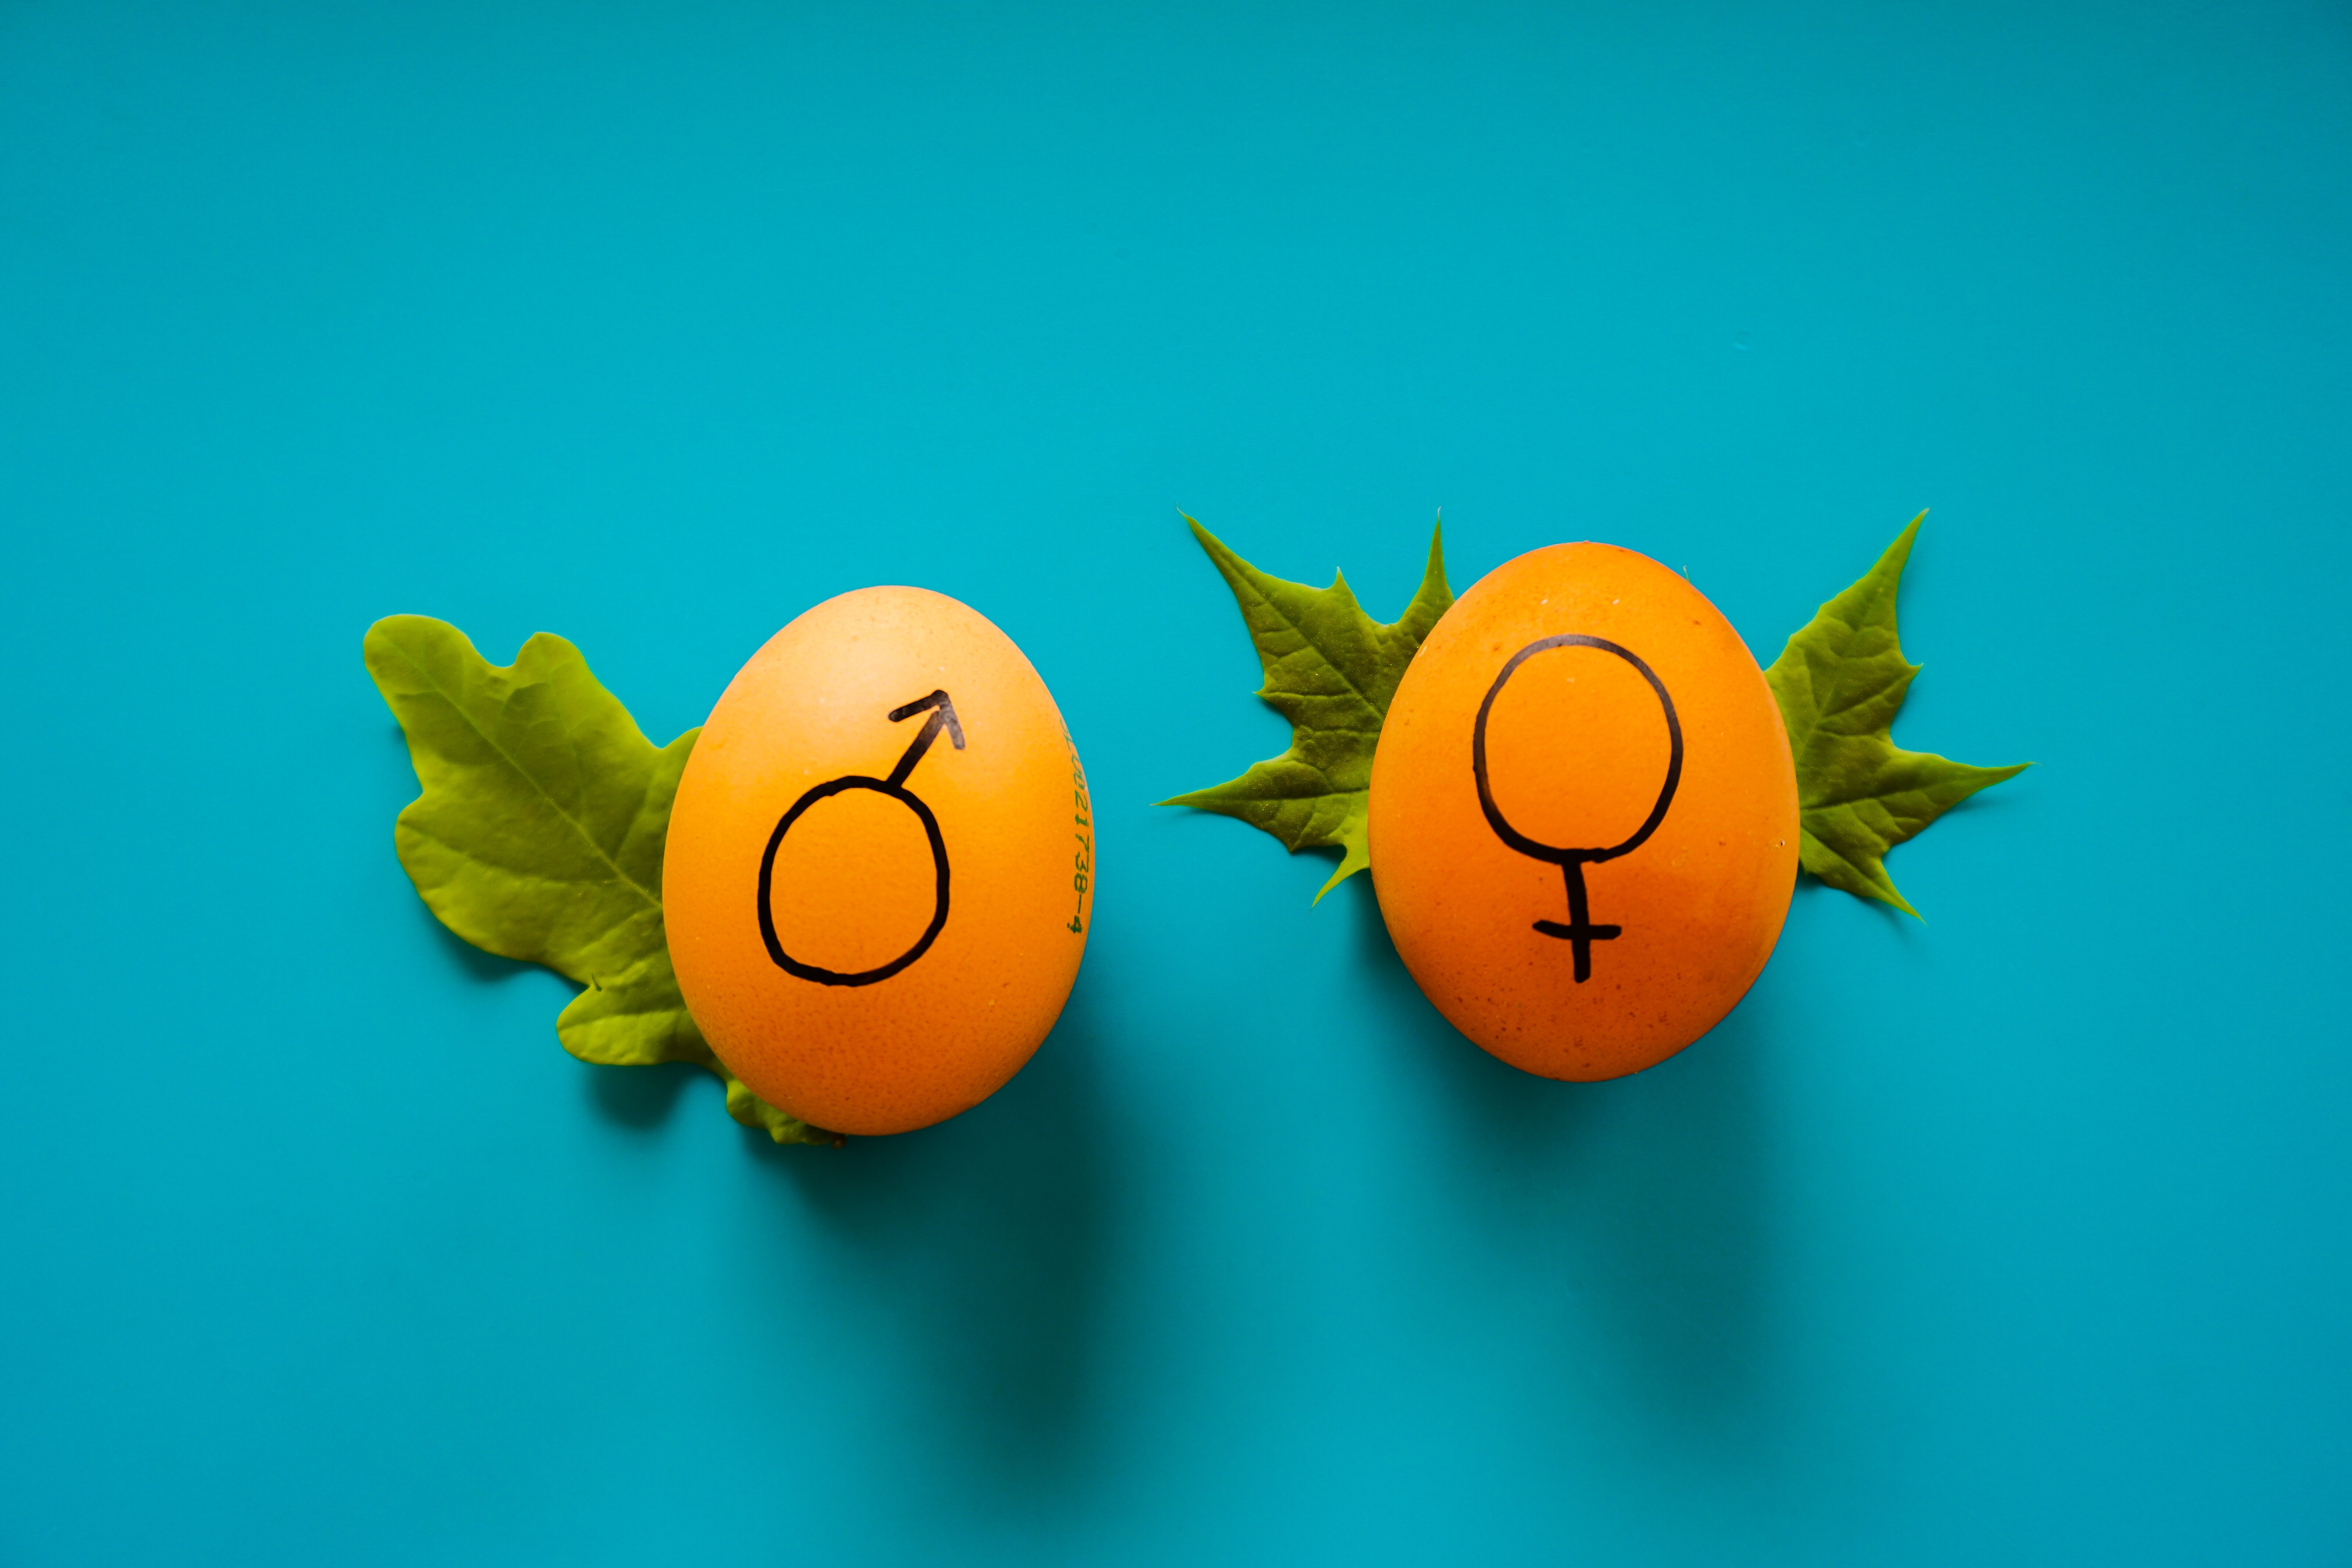 Female and male symbols written on eggs